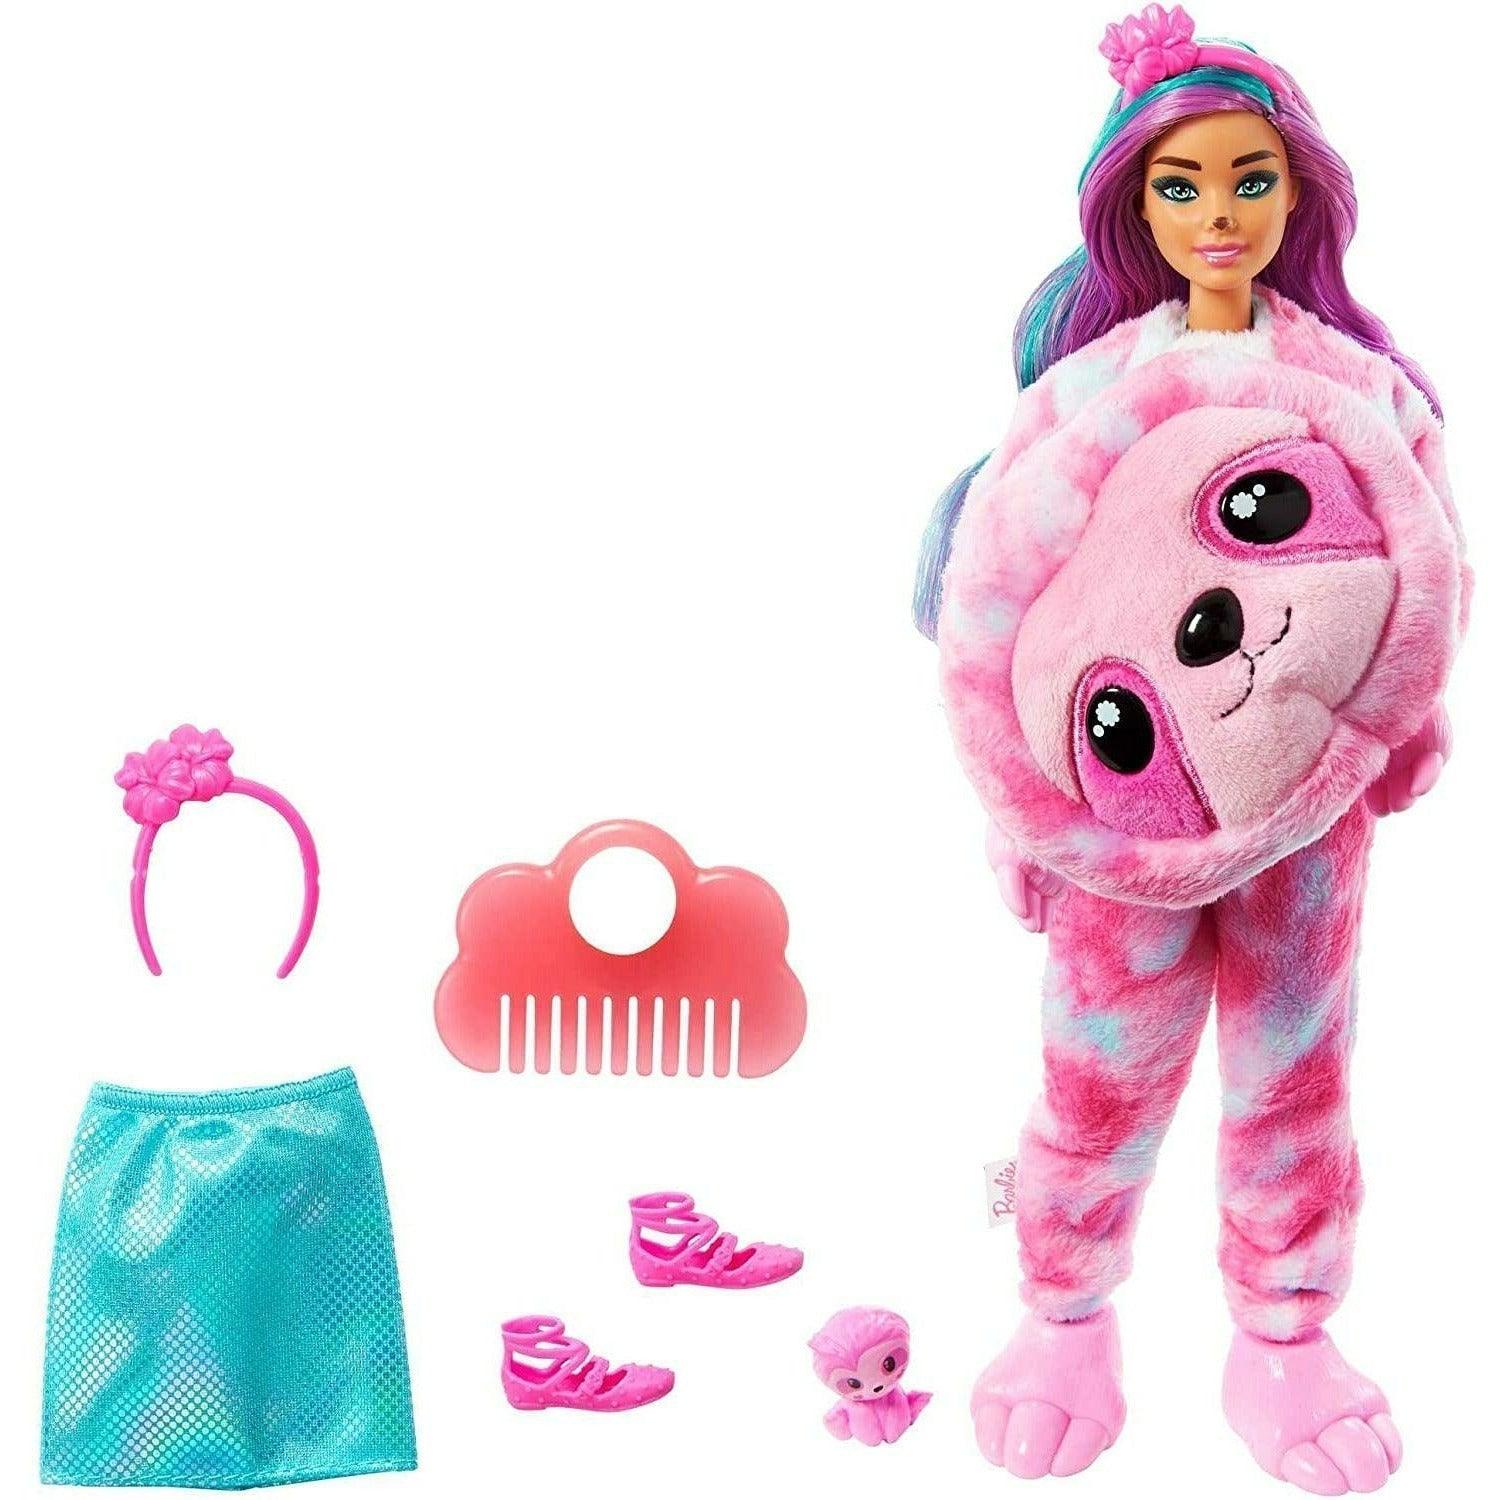 Barbie Cutie Reveal Fantasy Series Doll With Sloth Plush Costume & 10 Surprises Including Mini Pet & Color Change - BumbleToys - 5-7 Years, Barbie, Fashion Dolls & Accessories, Girls, OXE, Pre-Order